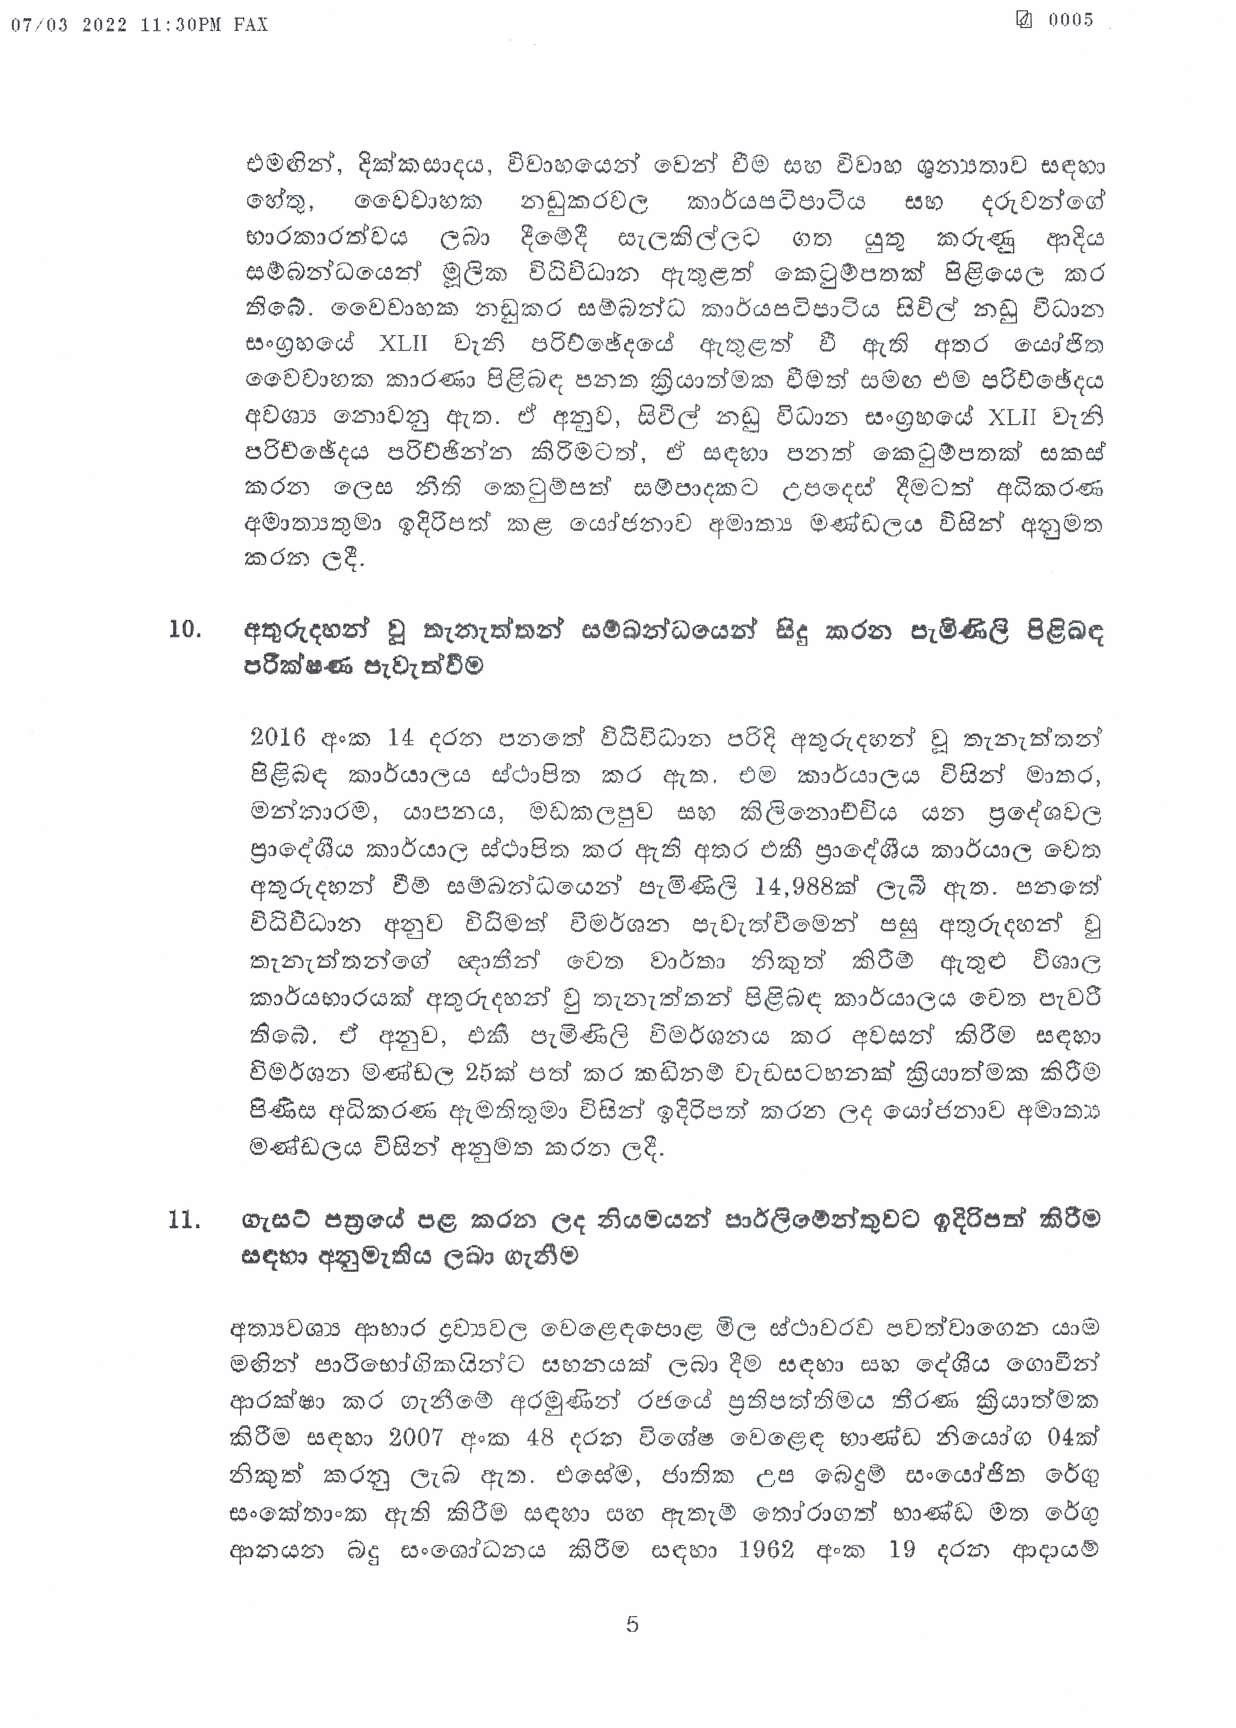 Cabinet Decision on 07.03.2022 page 005 Copy